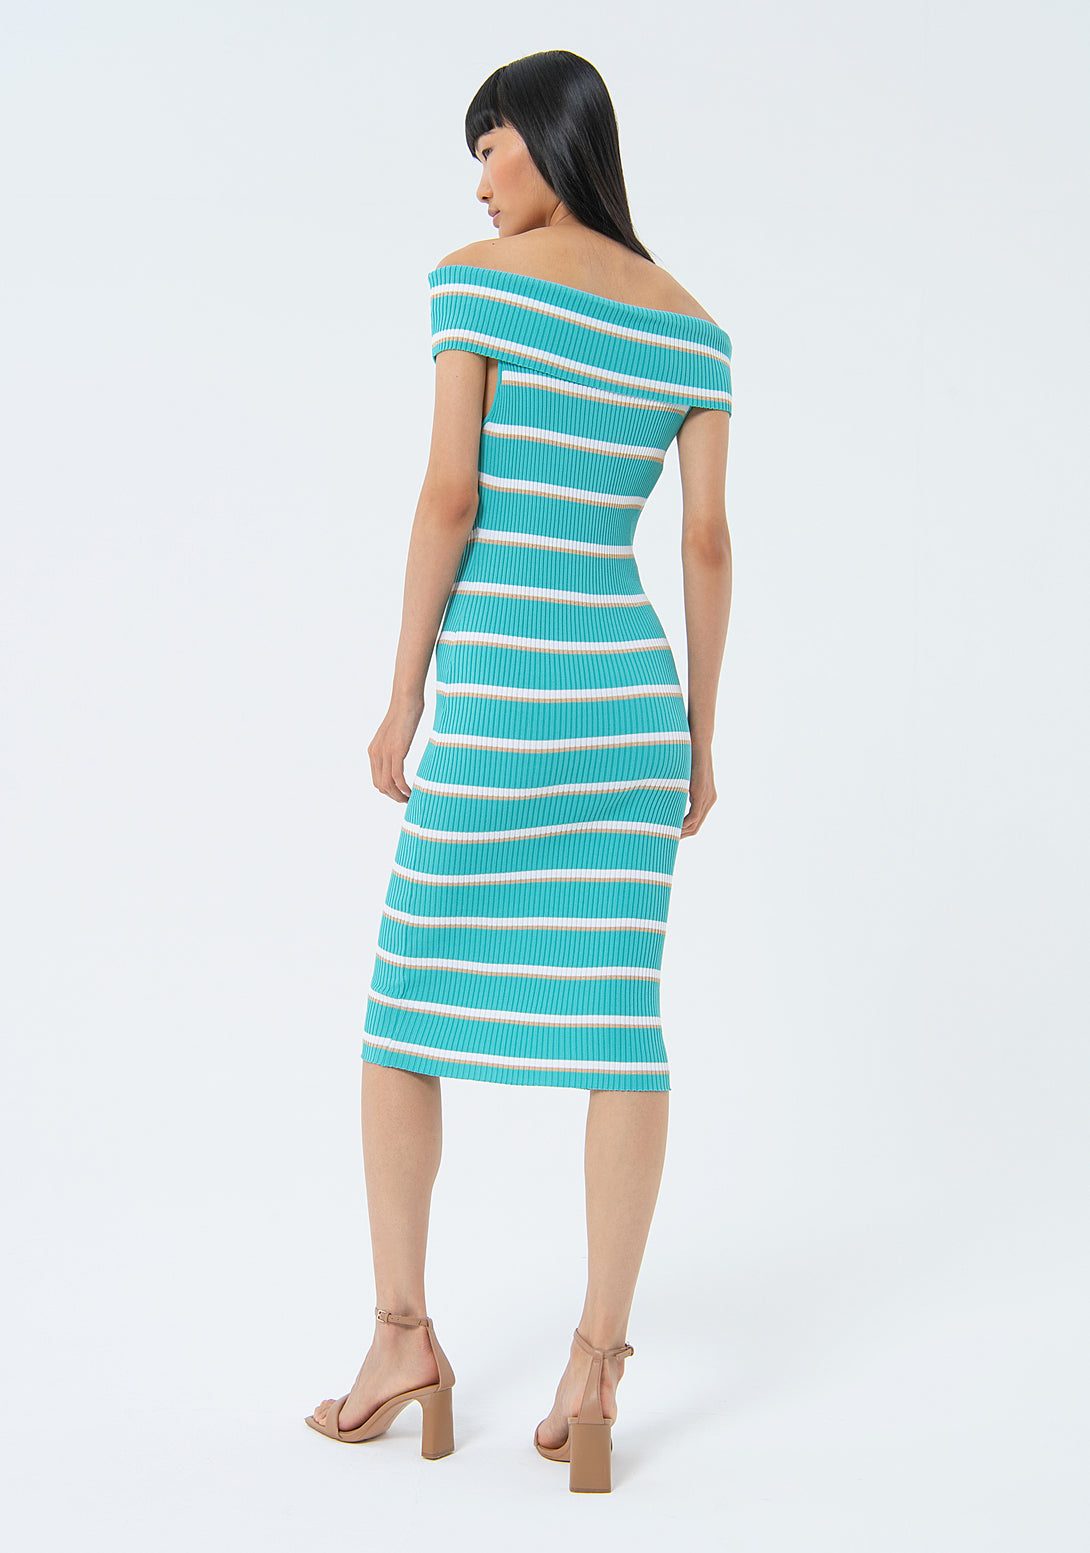 Knitted dress slim fit, middle length, with ribs and stripes Fracomina FS24SD5001K420N8-S52-3